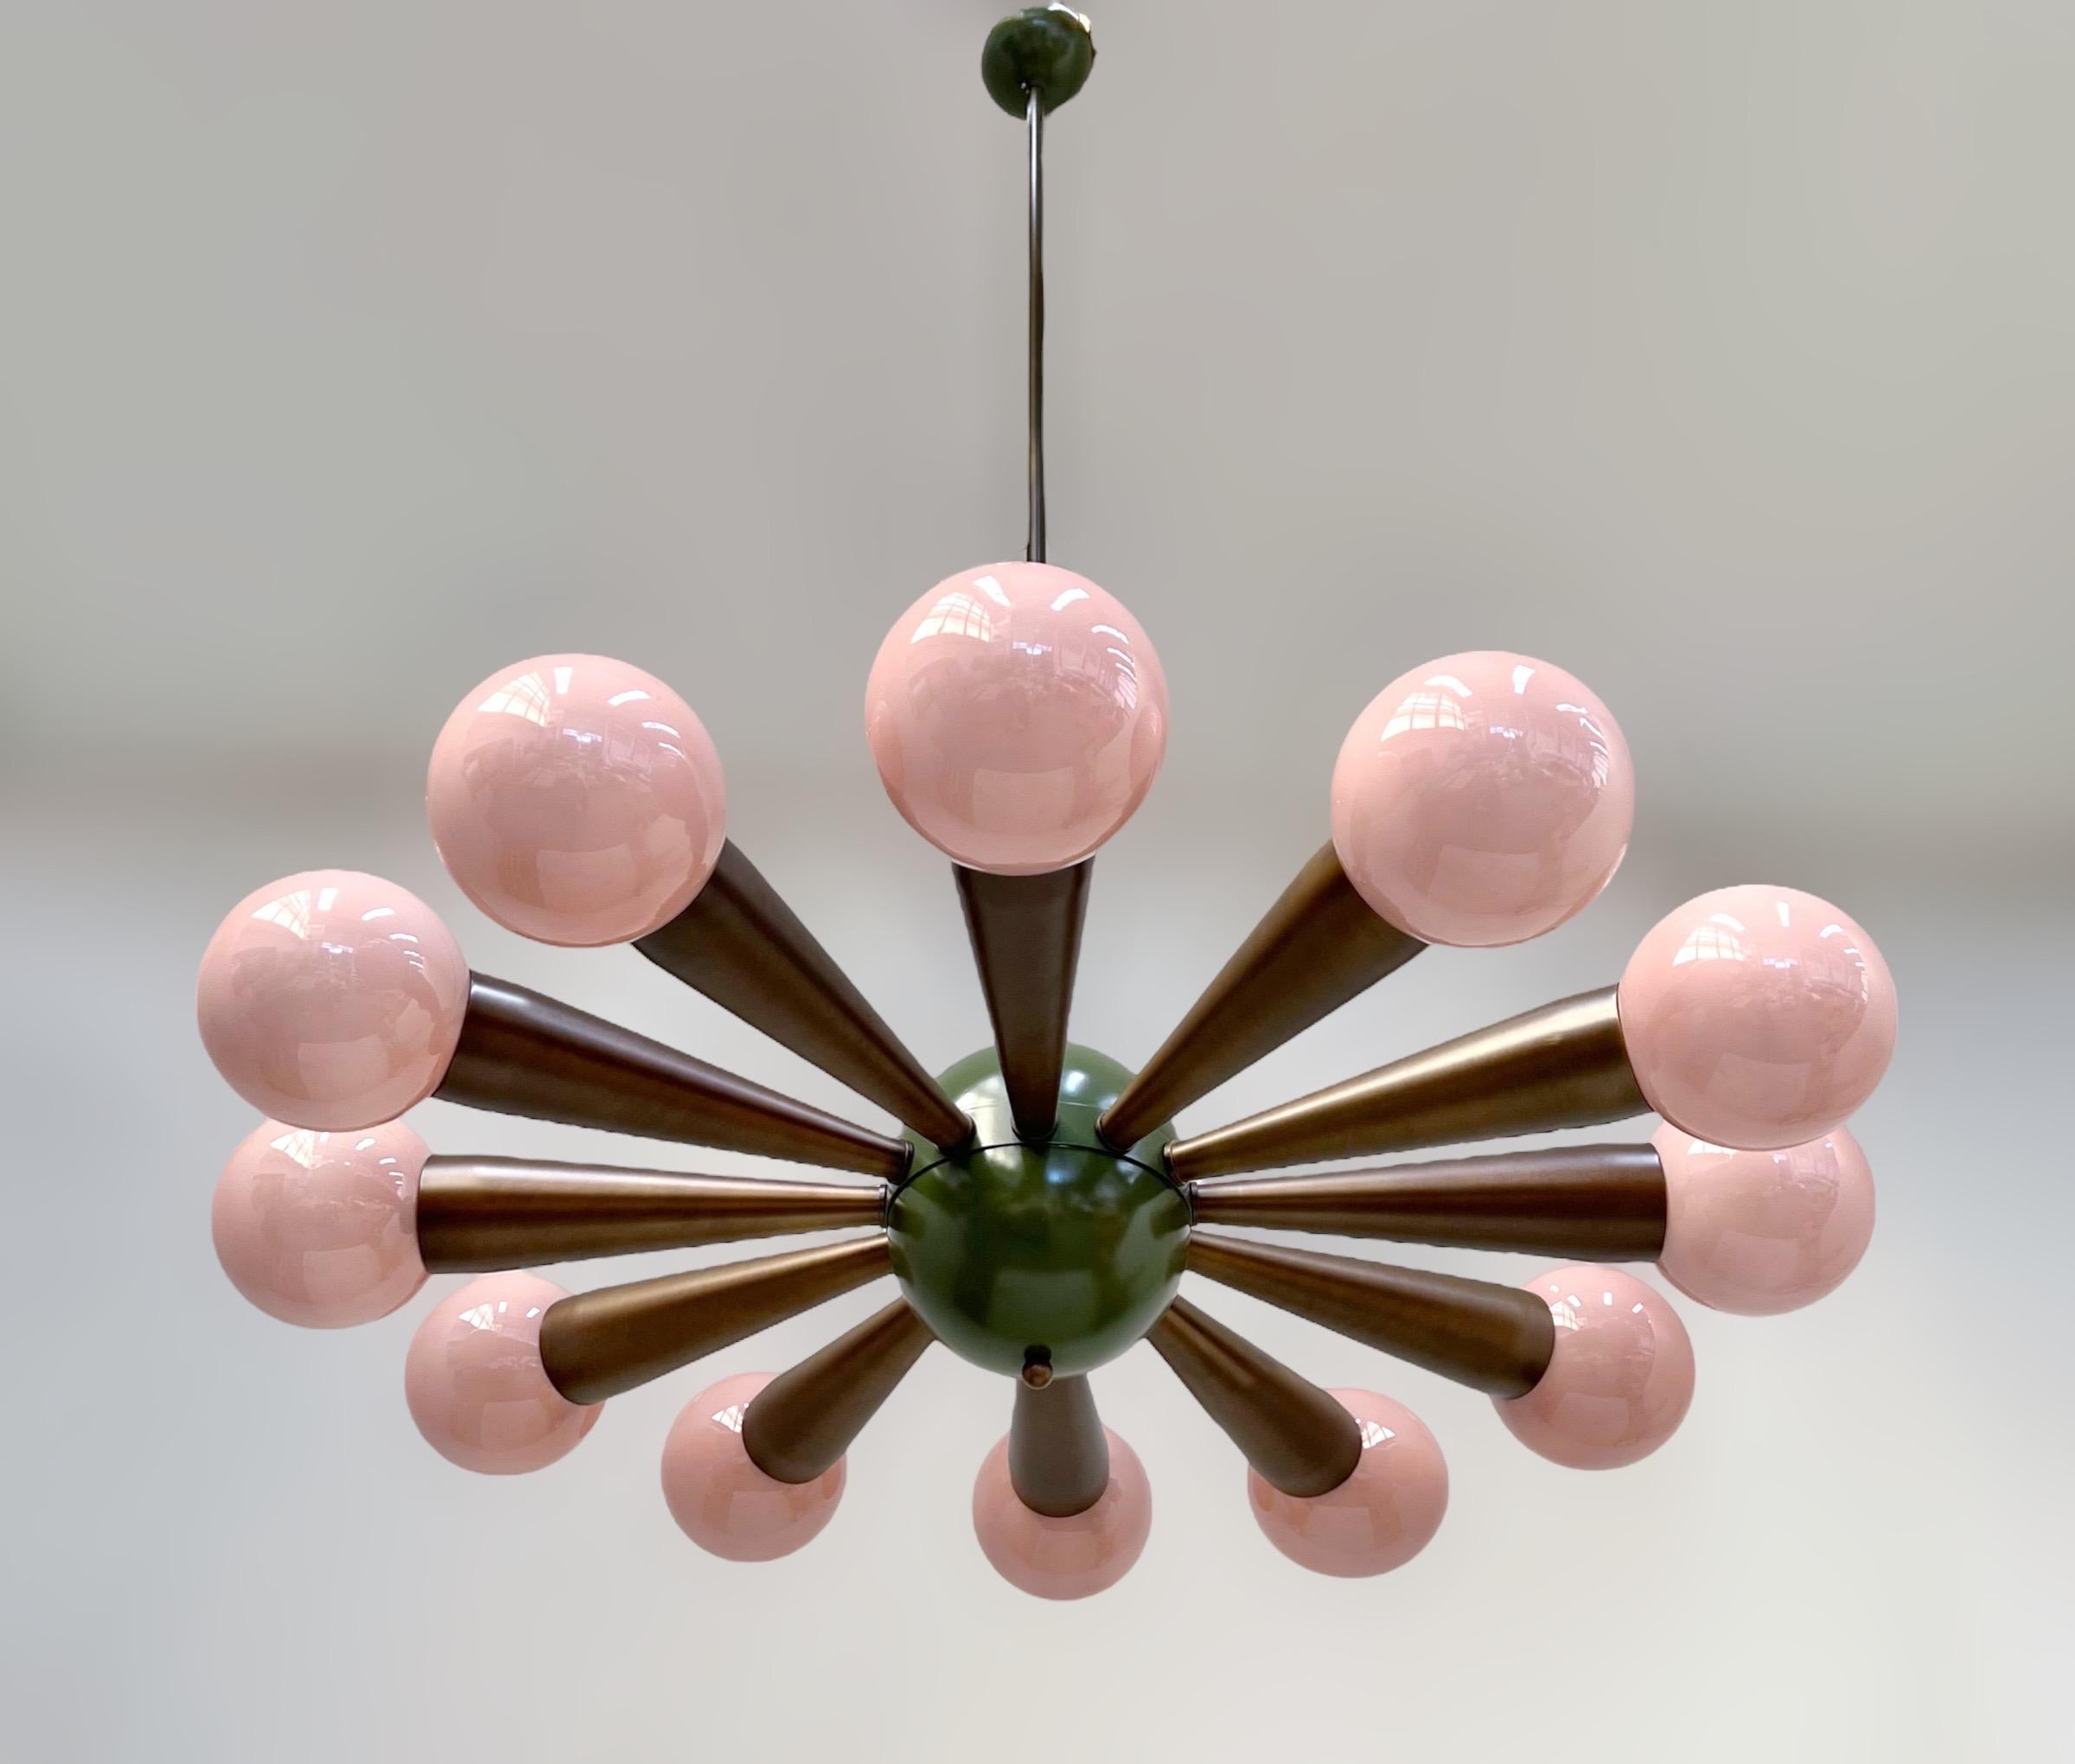 Italian chandelier with opaque pink coral colored Murano glass orbs, mounted on bronzed frame / Designed by Fabio Bergomi for Fabio Ltd / Made in Italy
12 lights / E12 or E14 type / max 40W each
Measures: Diameter 43 inches / Height 66 inches